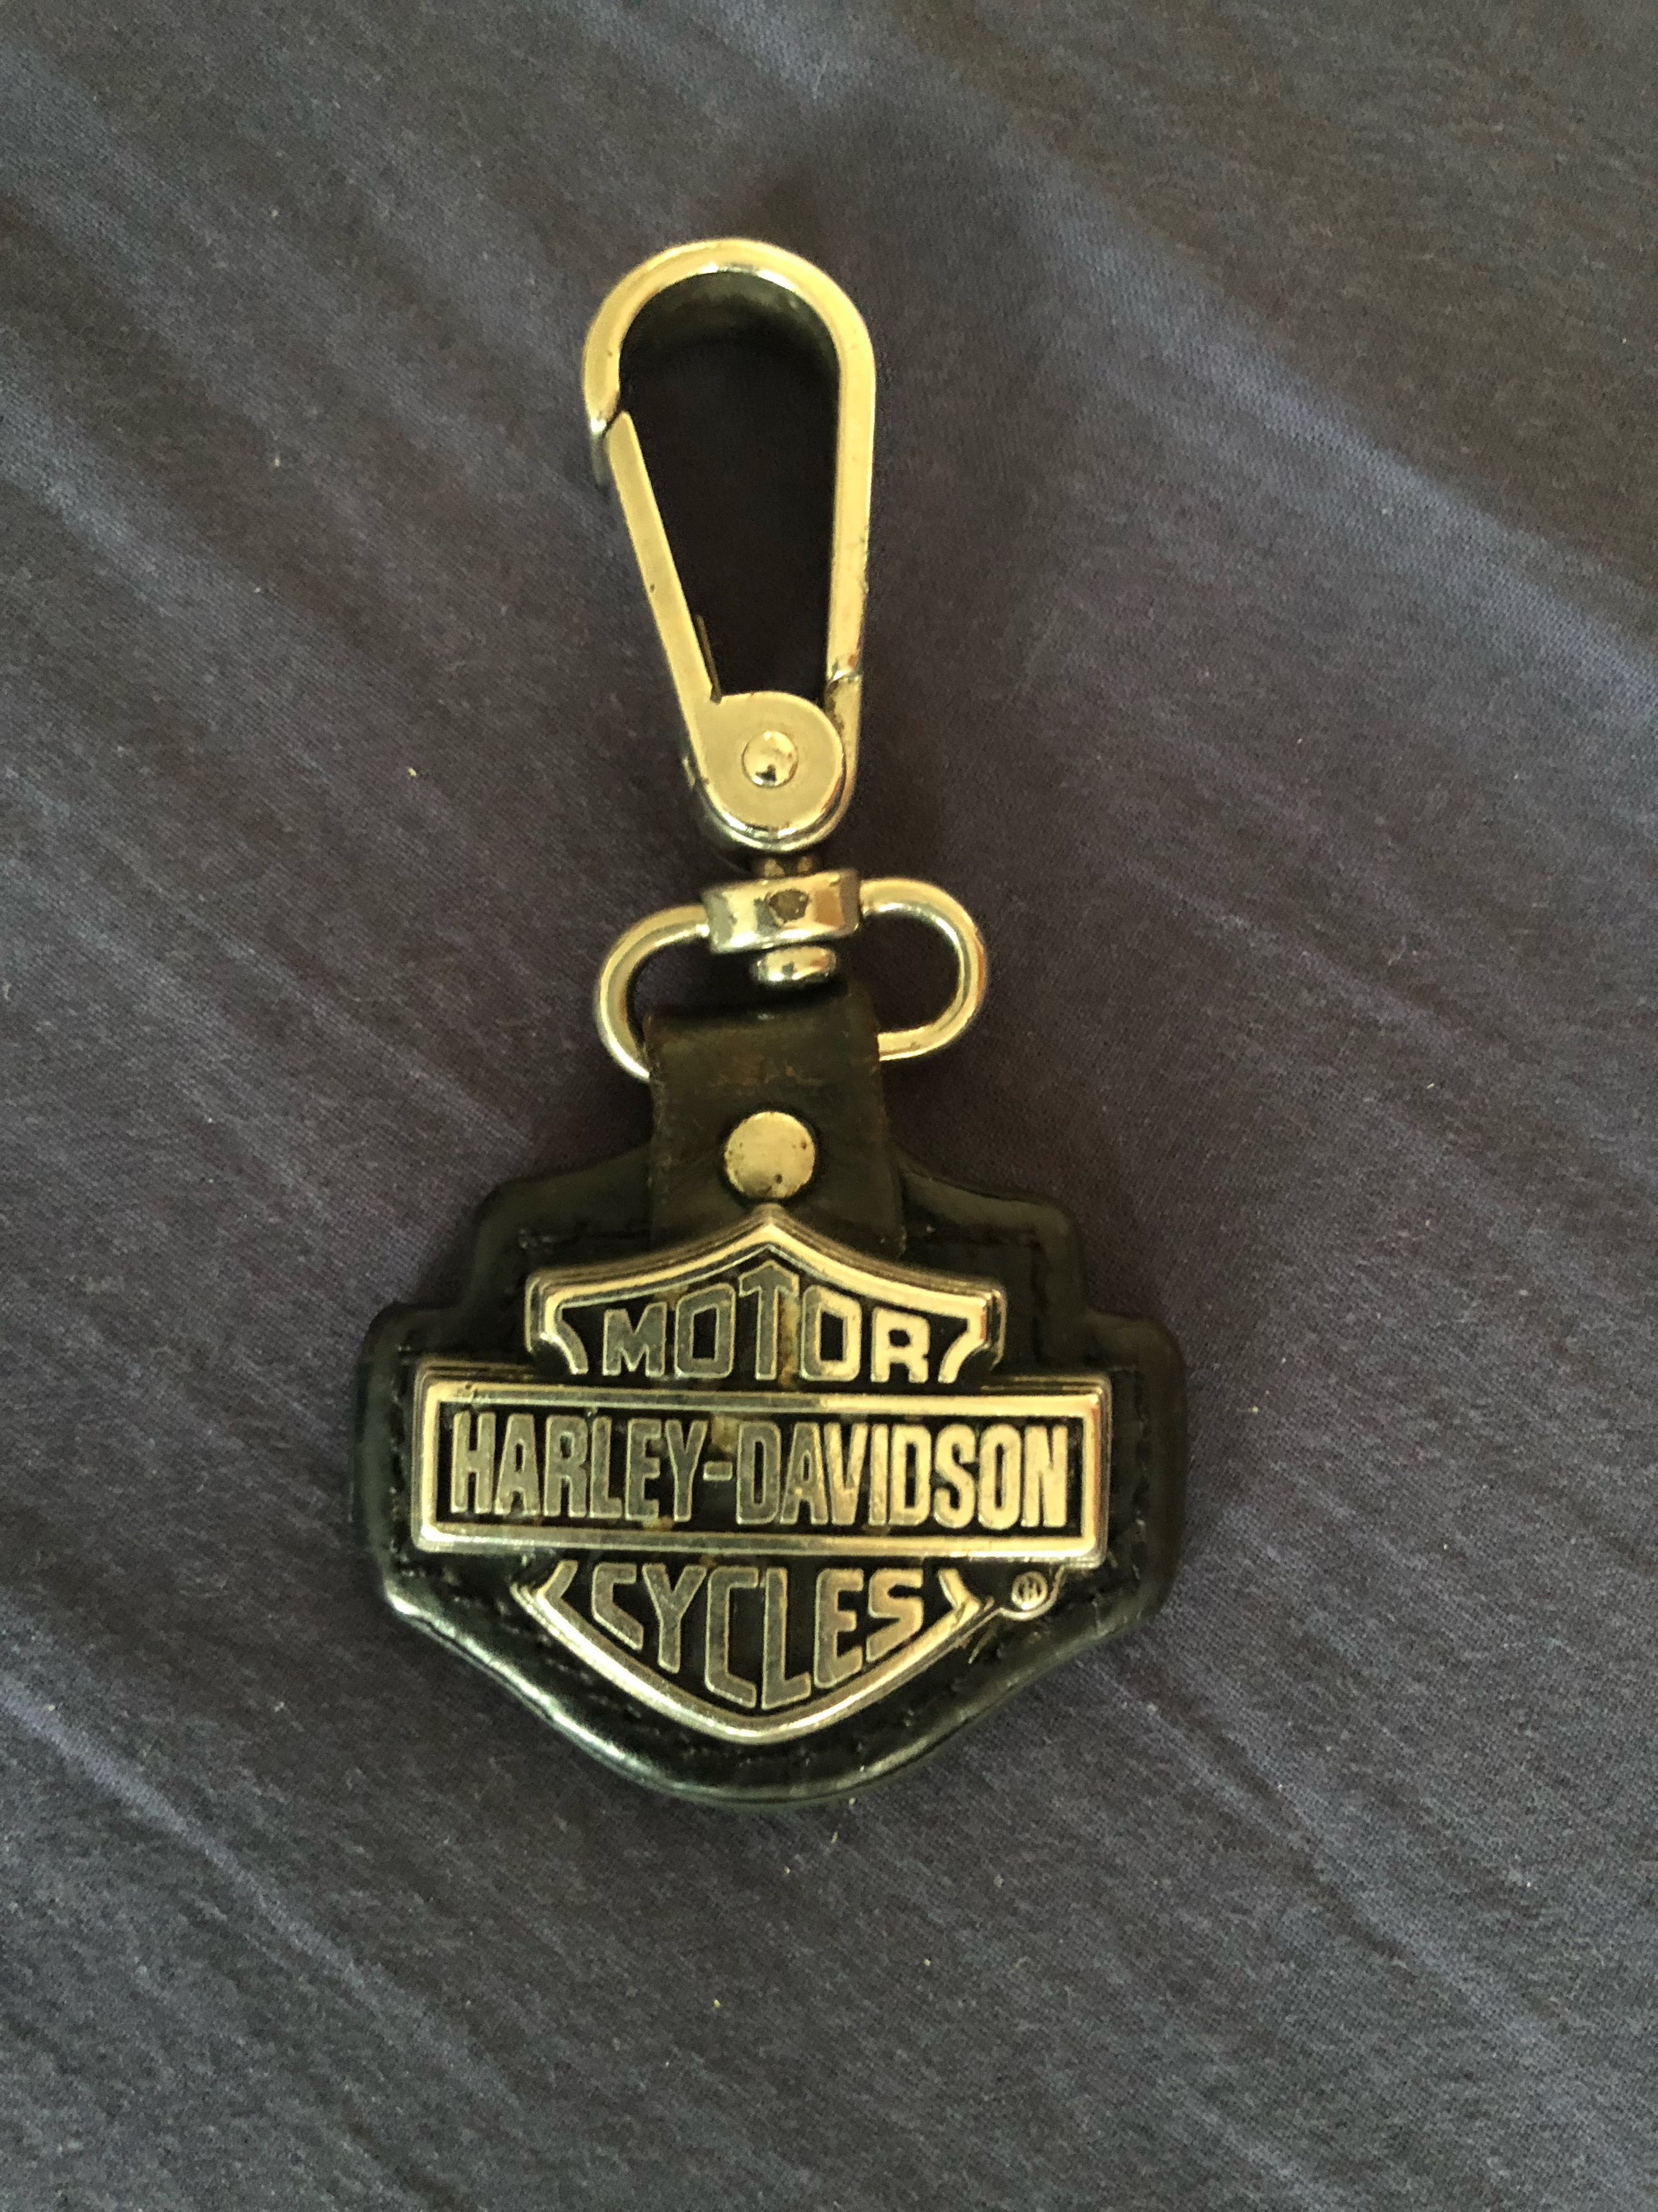 Harley Davidson Key Chain Motorcycles Motorcycle Accessories On Carousell